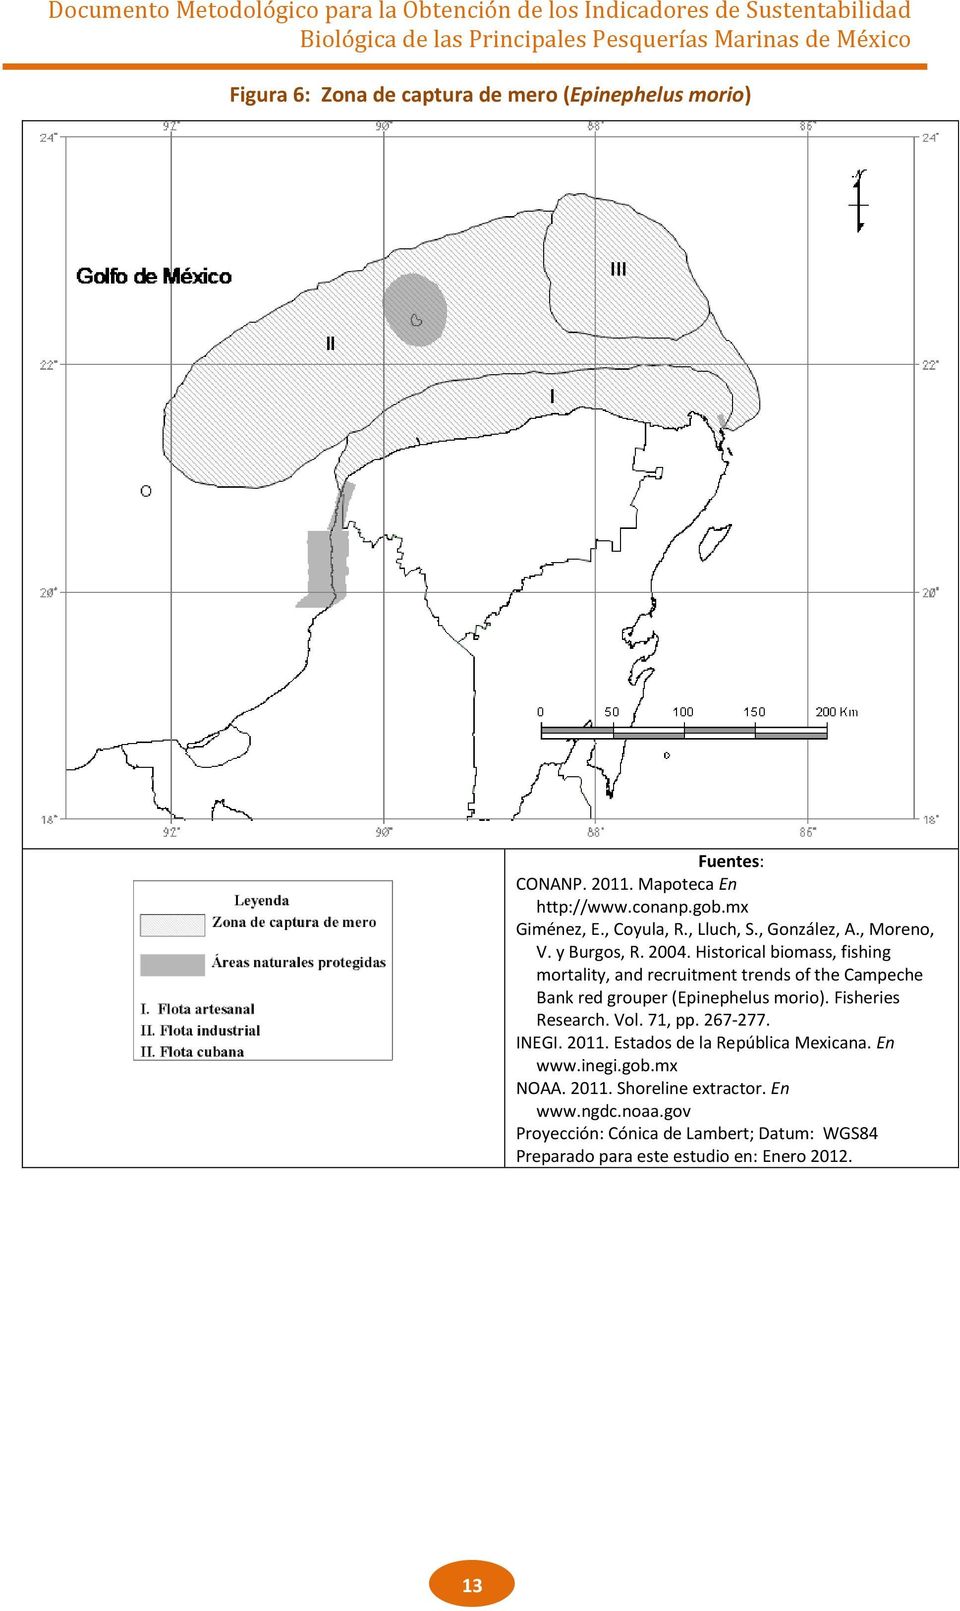 Historical biomass, fishing mortality, and recruitment trends of the Campeche Bank red grouper (Epinephelus morio). Fisheries Research. Vol.